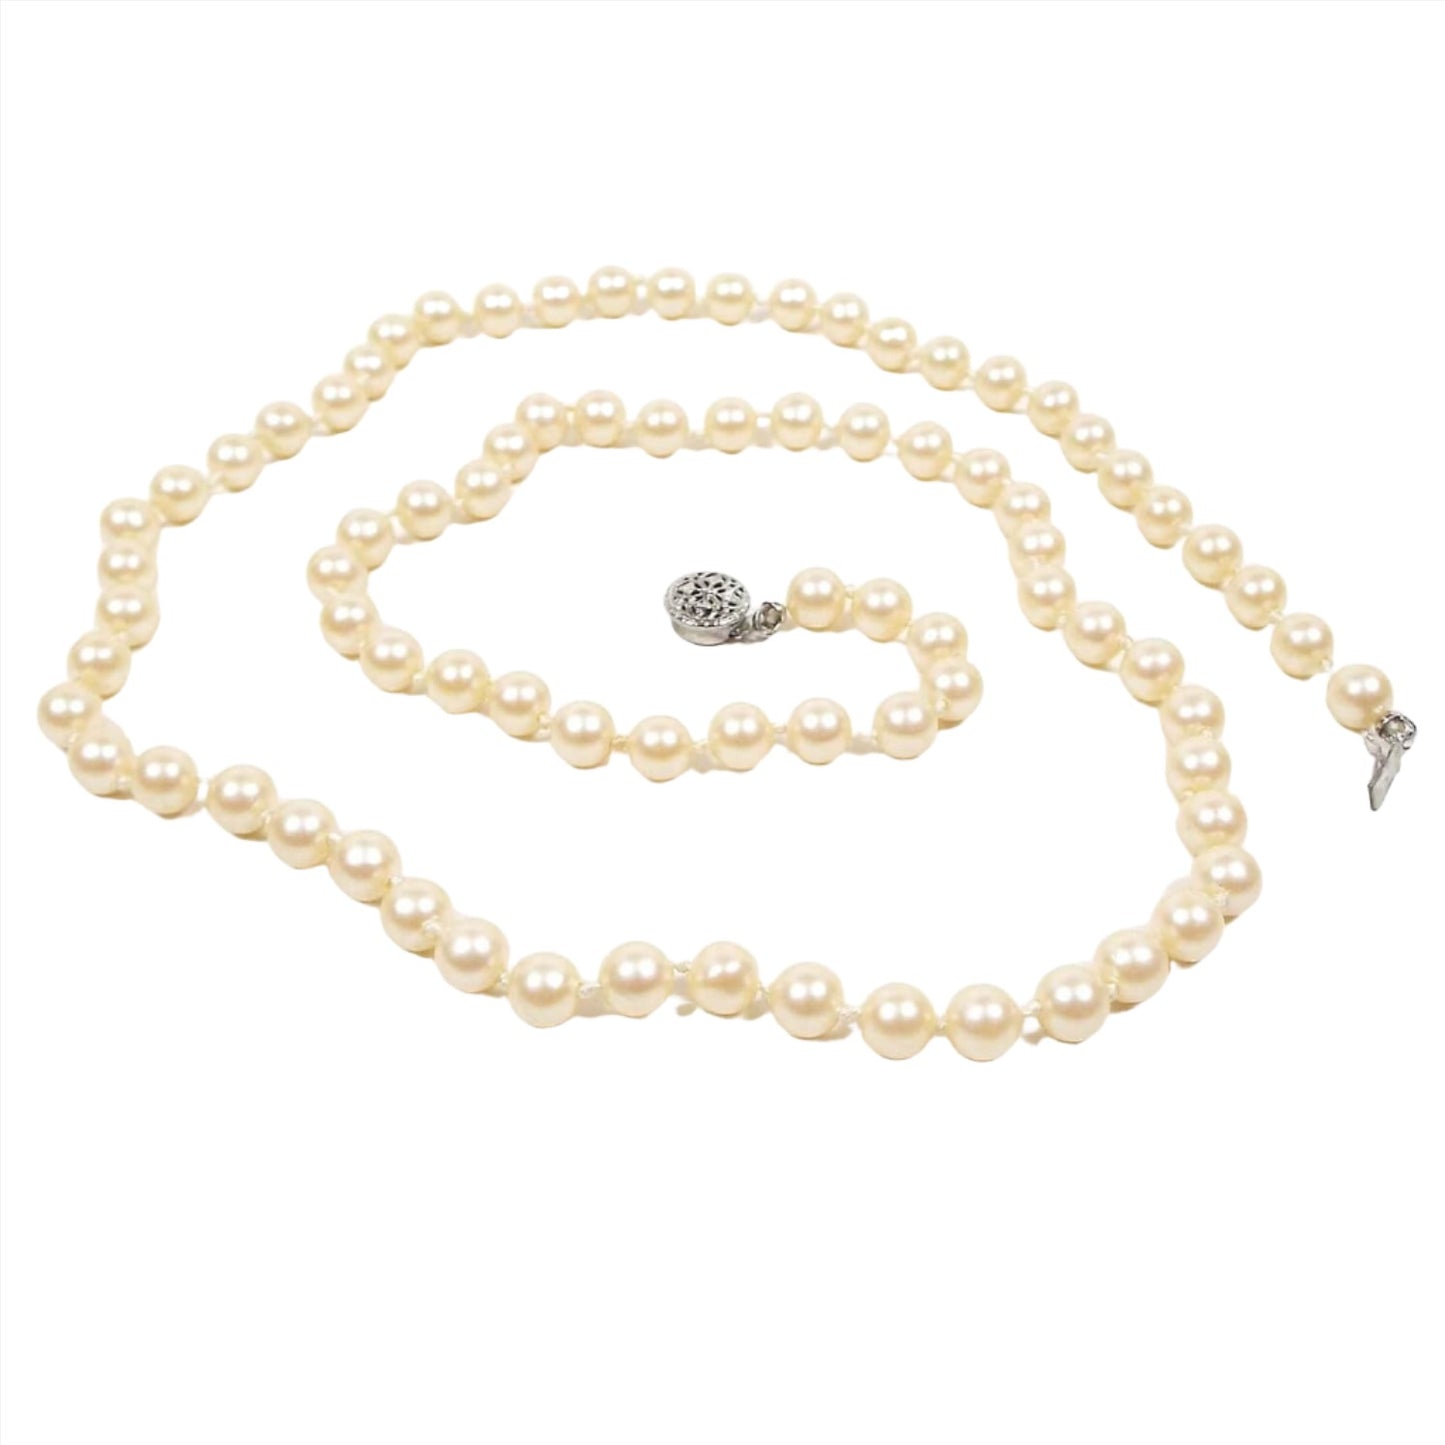 Top view of the Mid Century vintage faux pearl necklace. It is one strand of coated plastic round beads in an off white golden yellow color. The beads are have knots in between them. There is a silver tone filigree box clasp at the end.